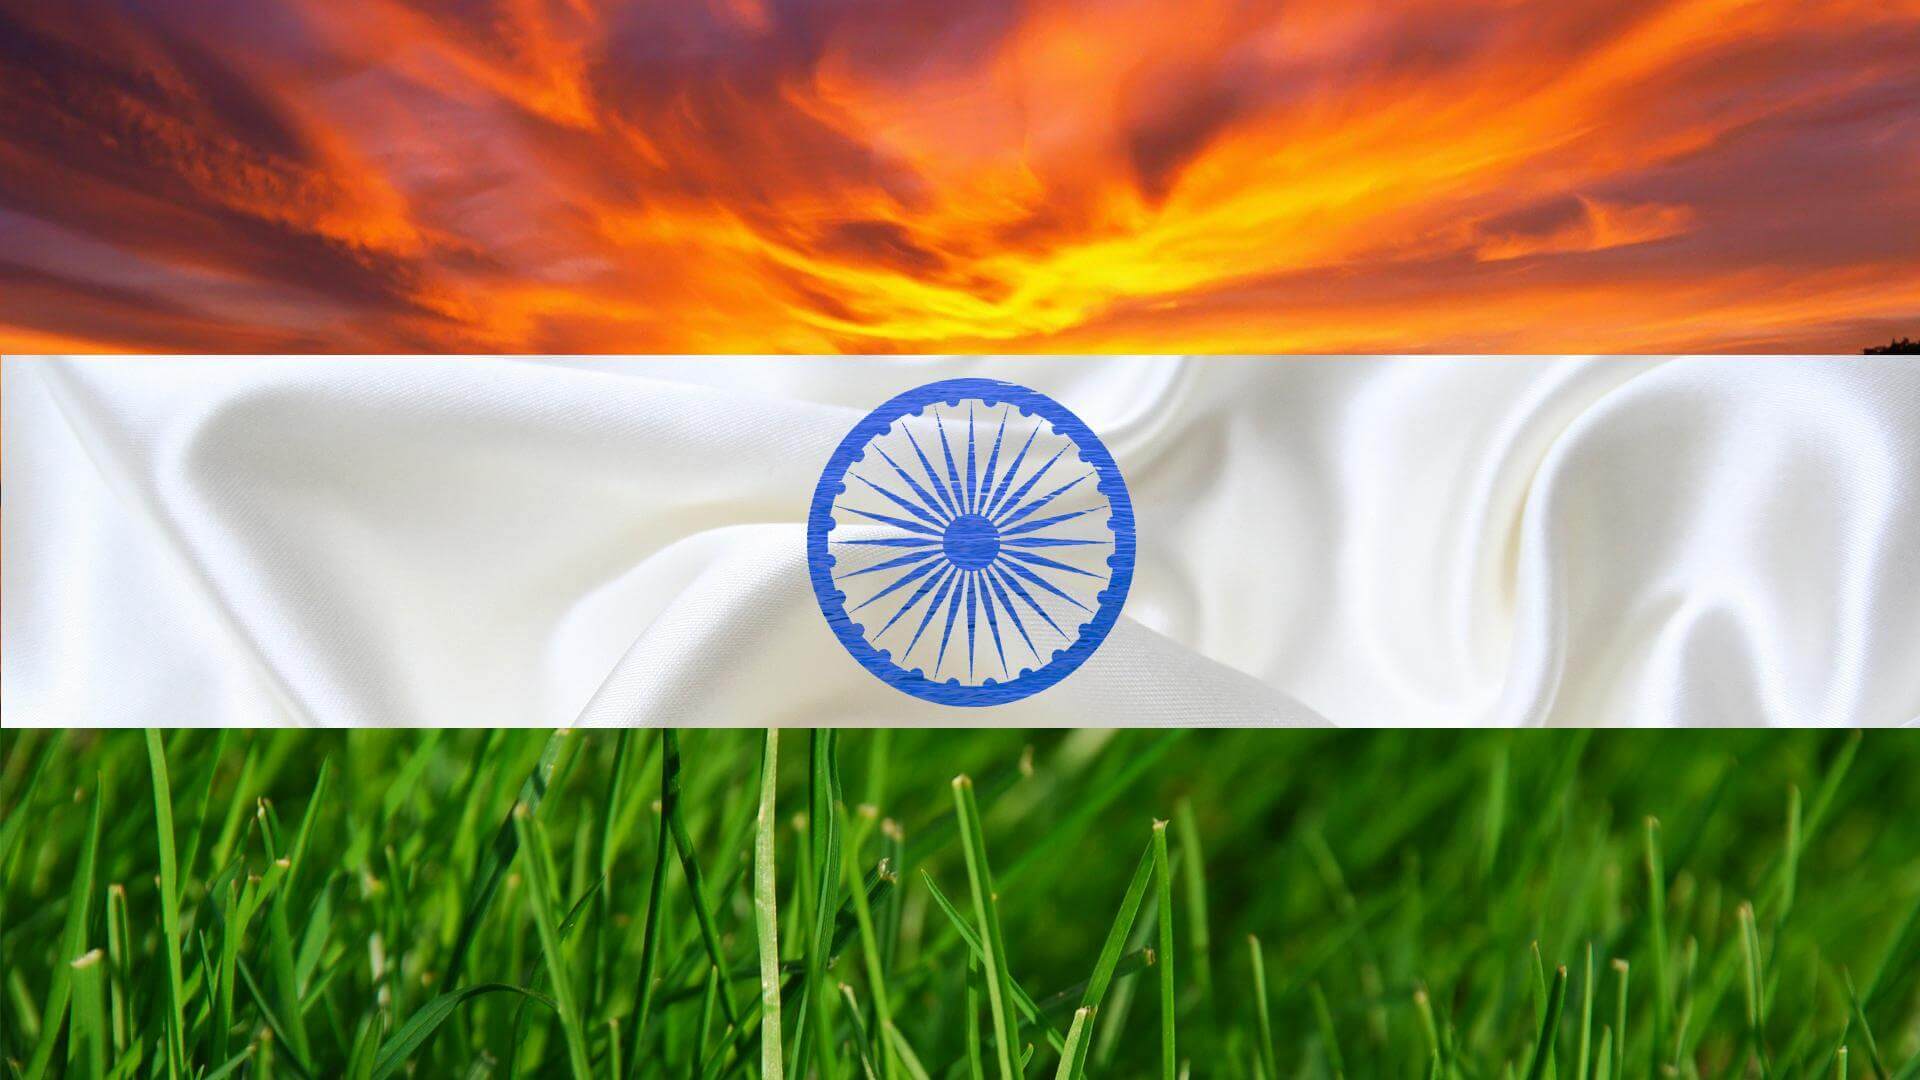 Happy Indian Independence Day 2021. Facts, Quotes, Image, Wishes, Whatsapp Status